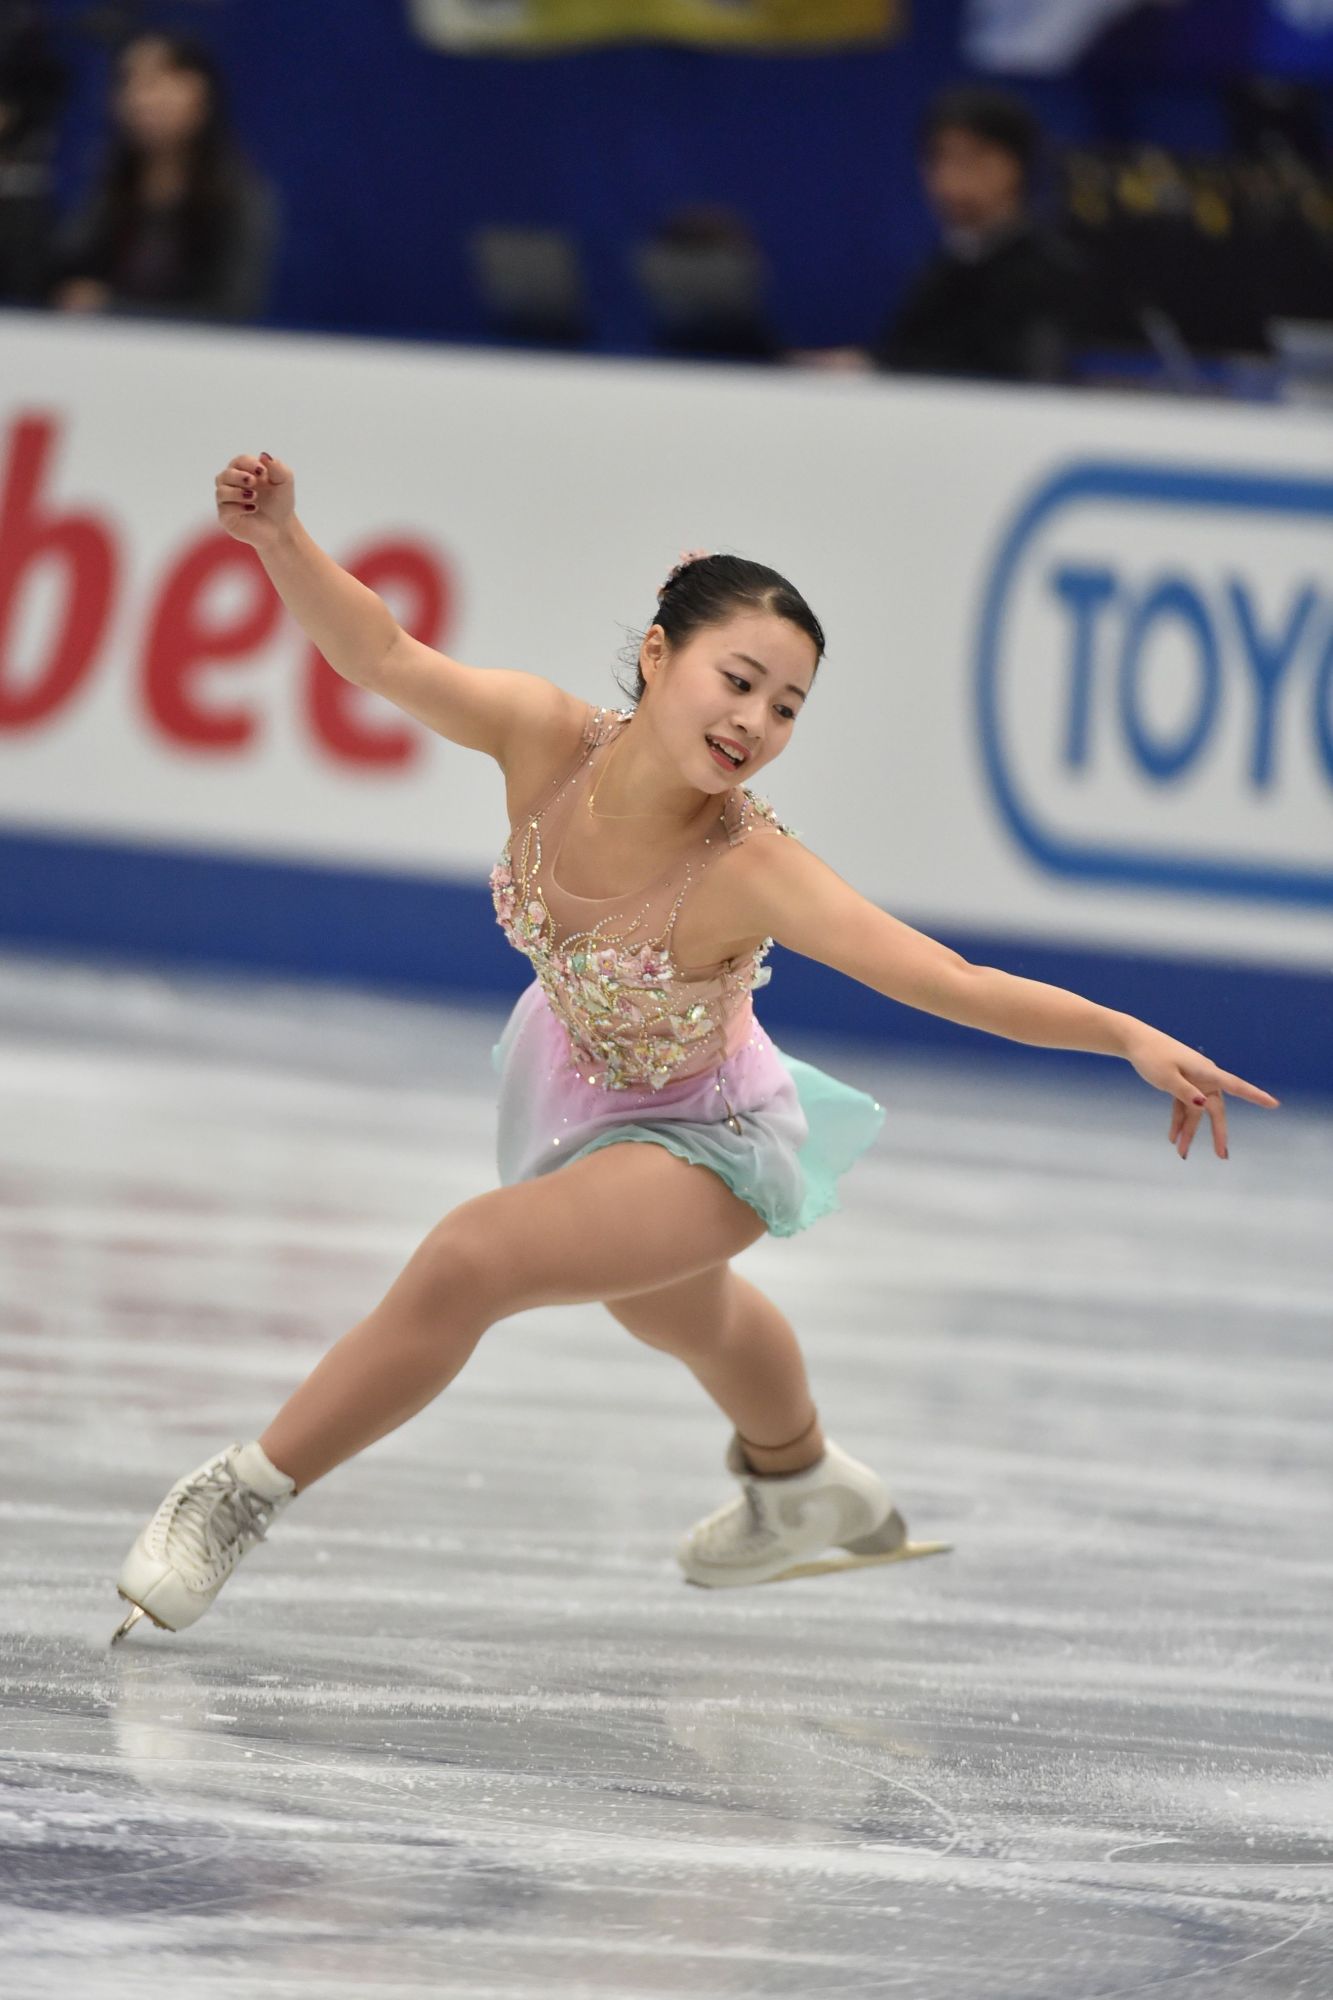 Satoko Miyahara's Olympic dream in serious jeopardy | The Japan Times